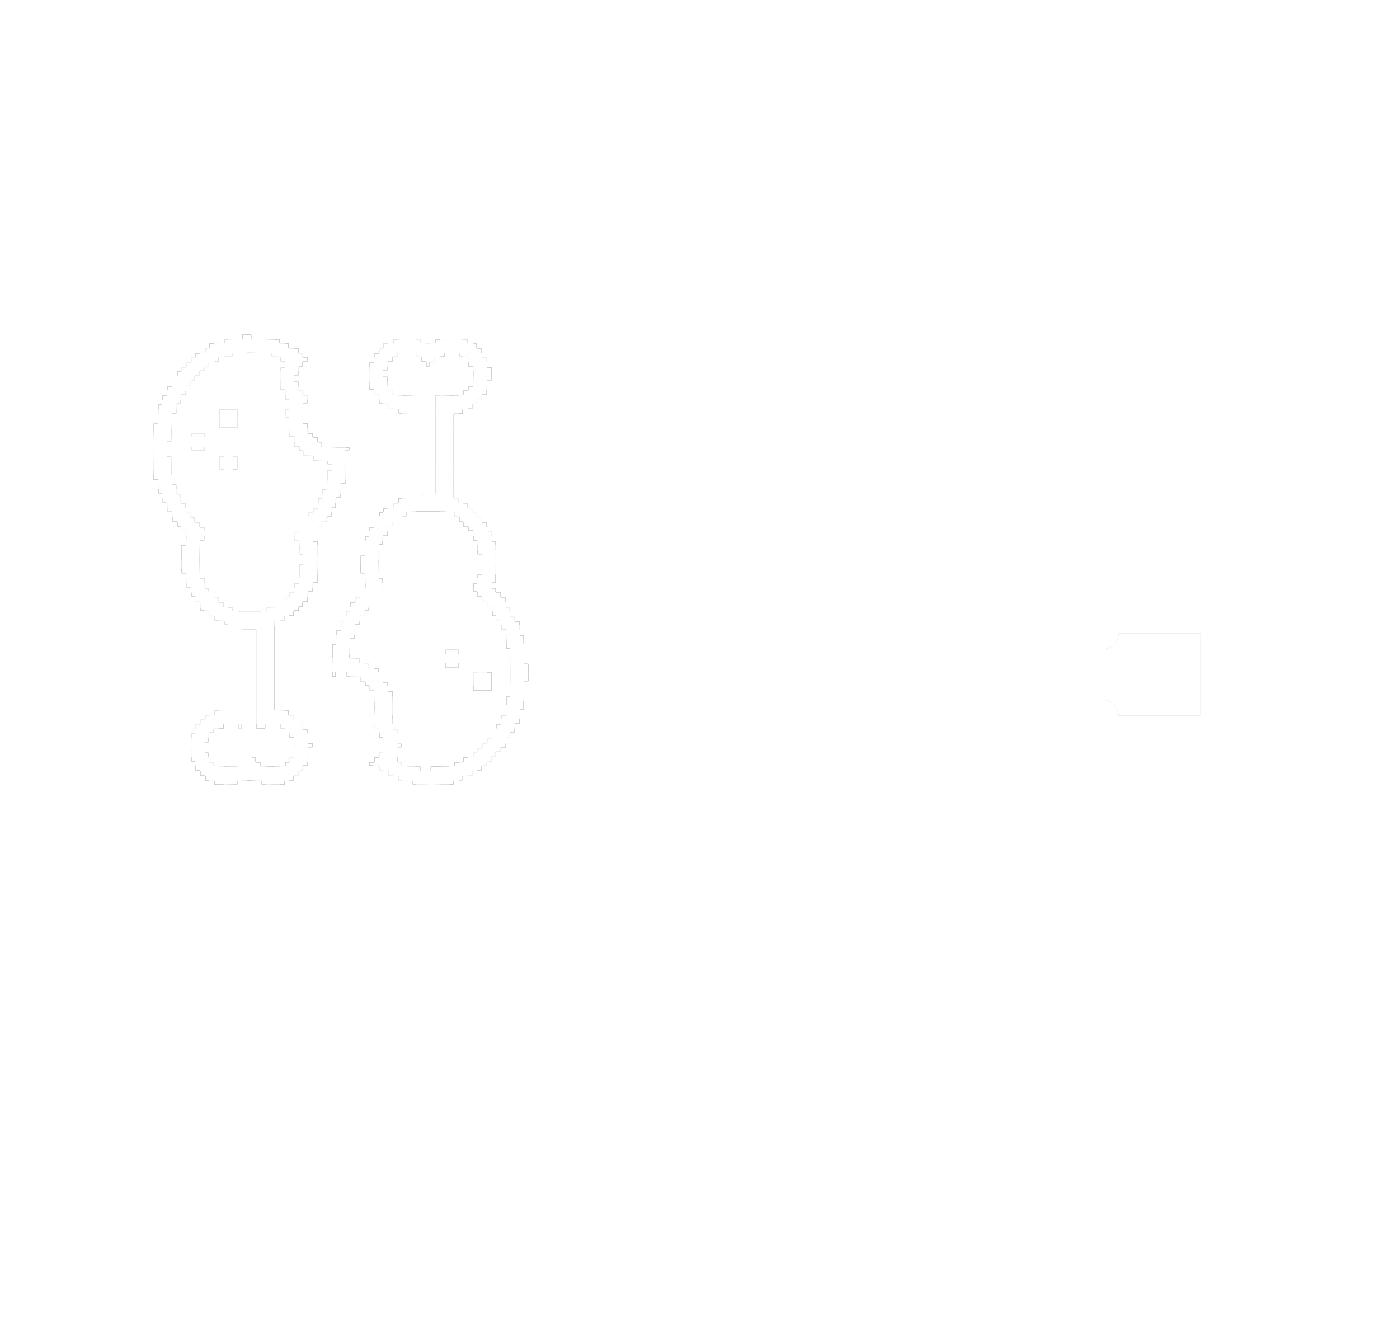 Wednesdays: 50% off wings with purchase of drink